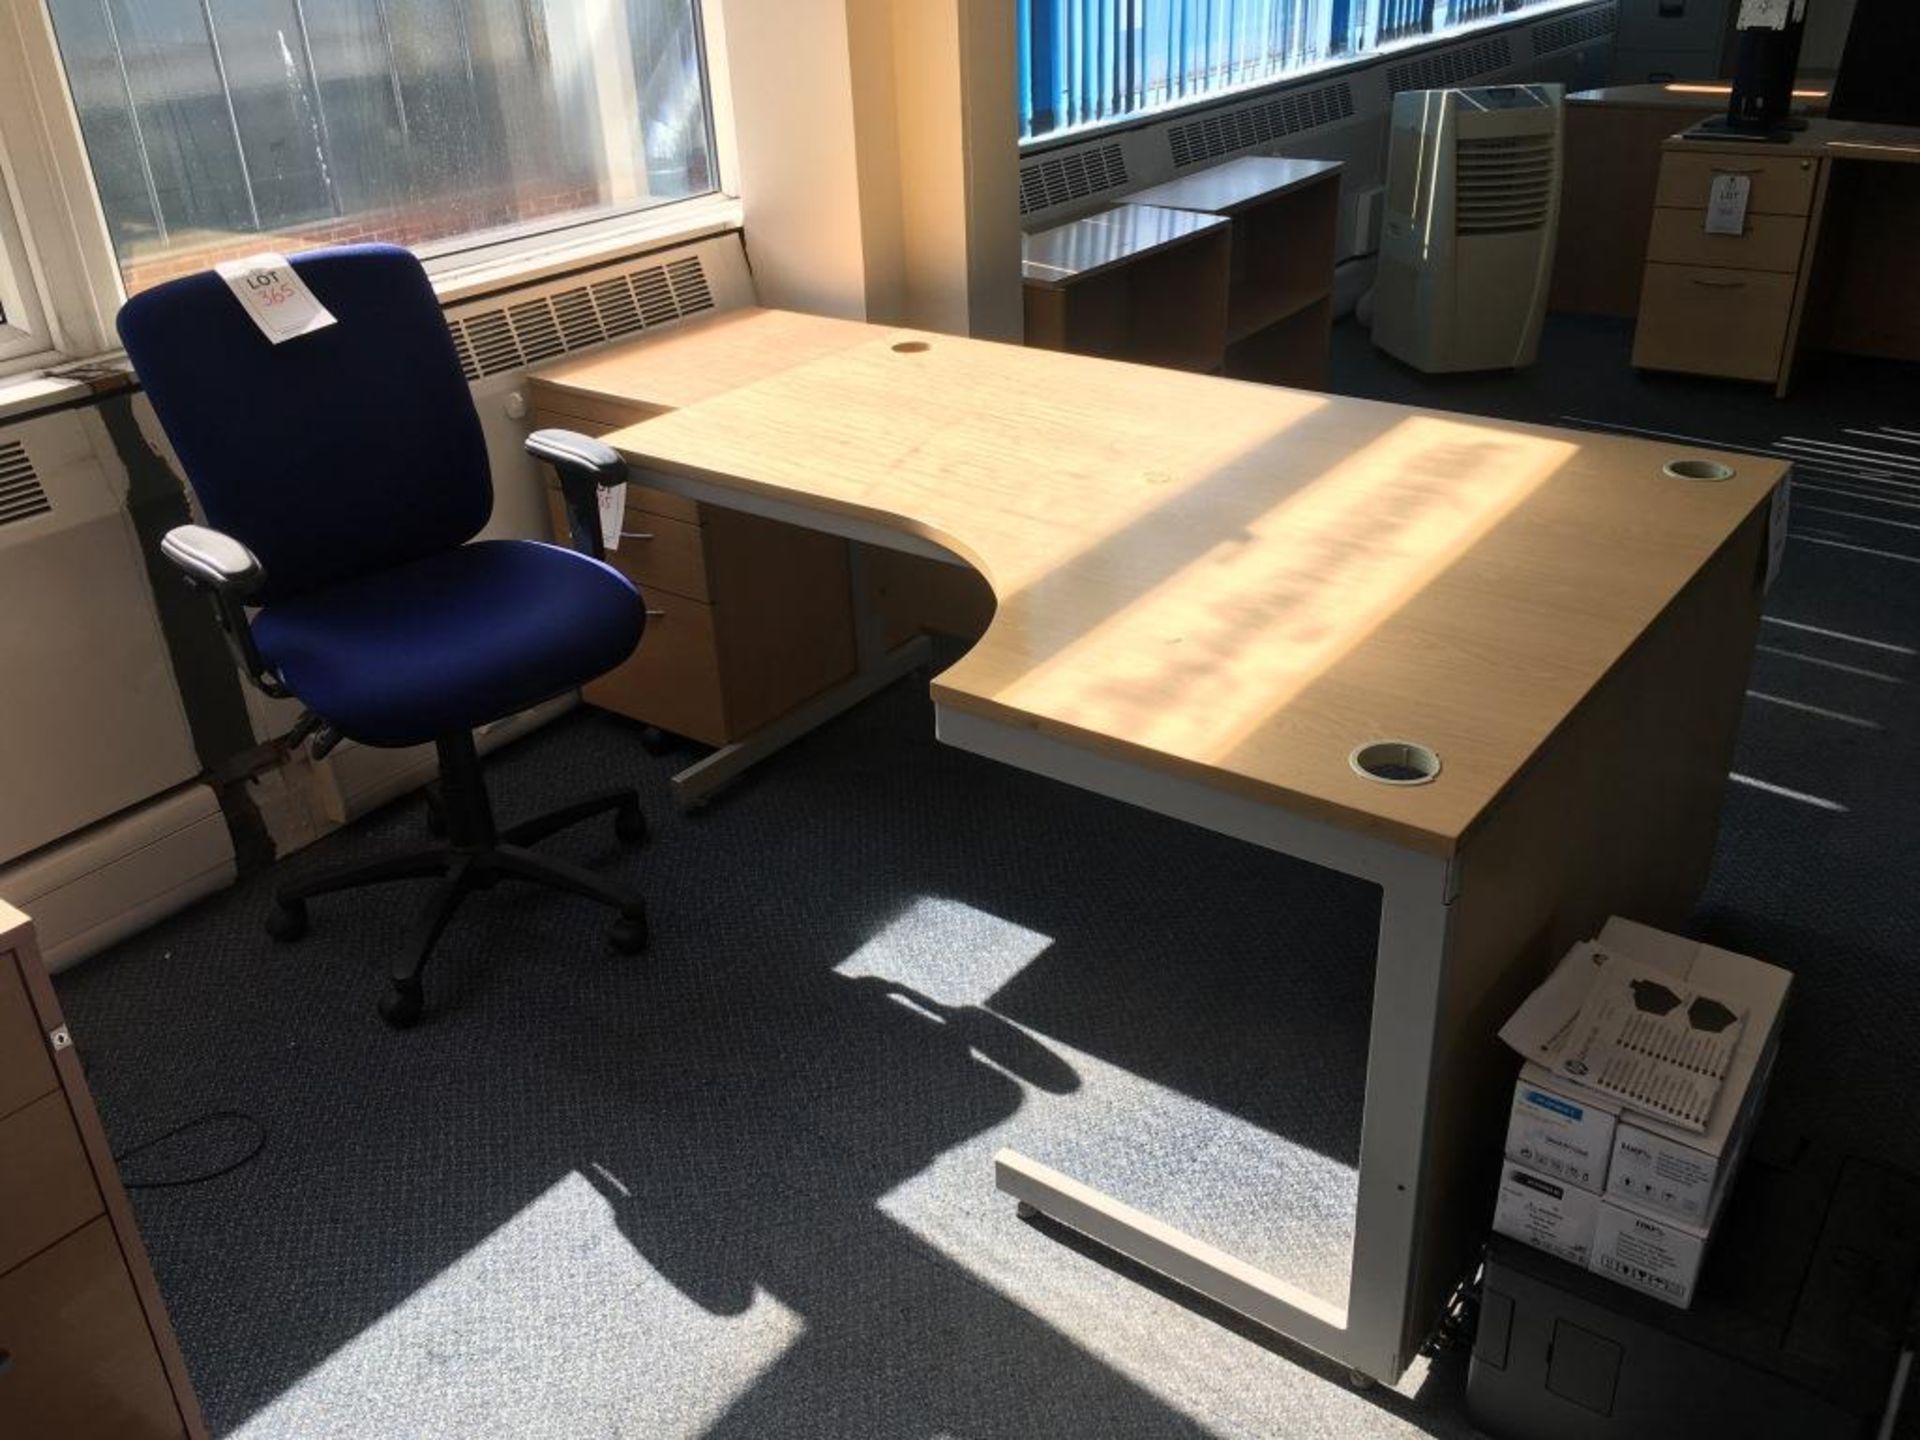 A L shaped desk, a swivel chair and a pedestal - Image 2 of 2